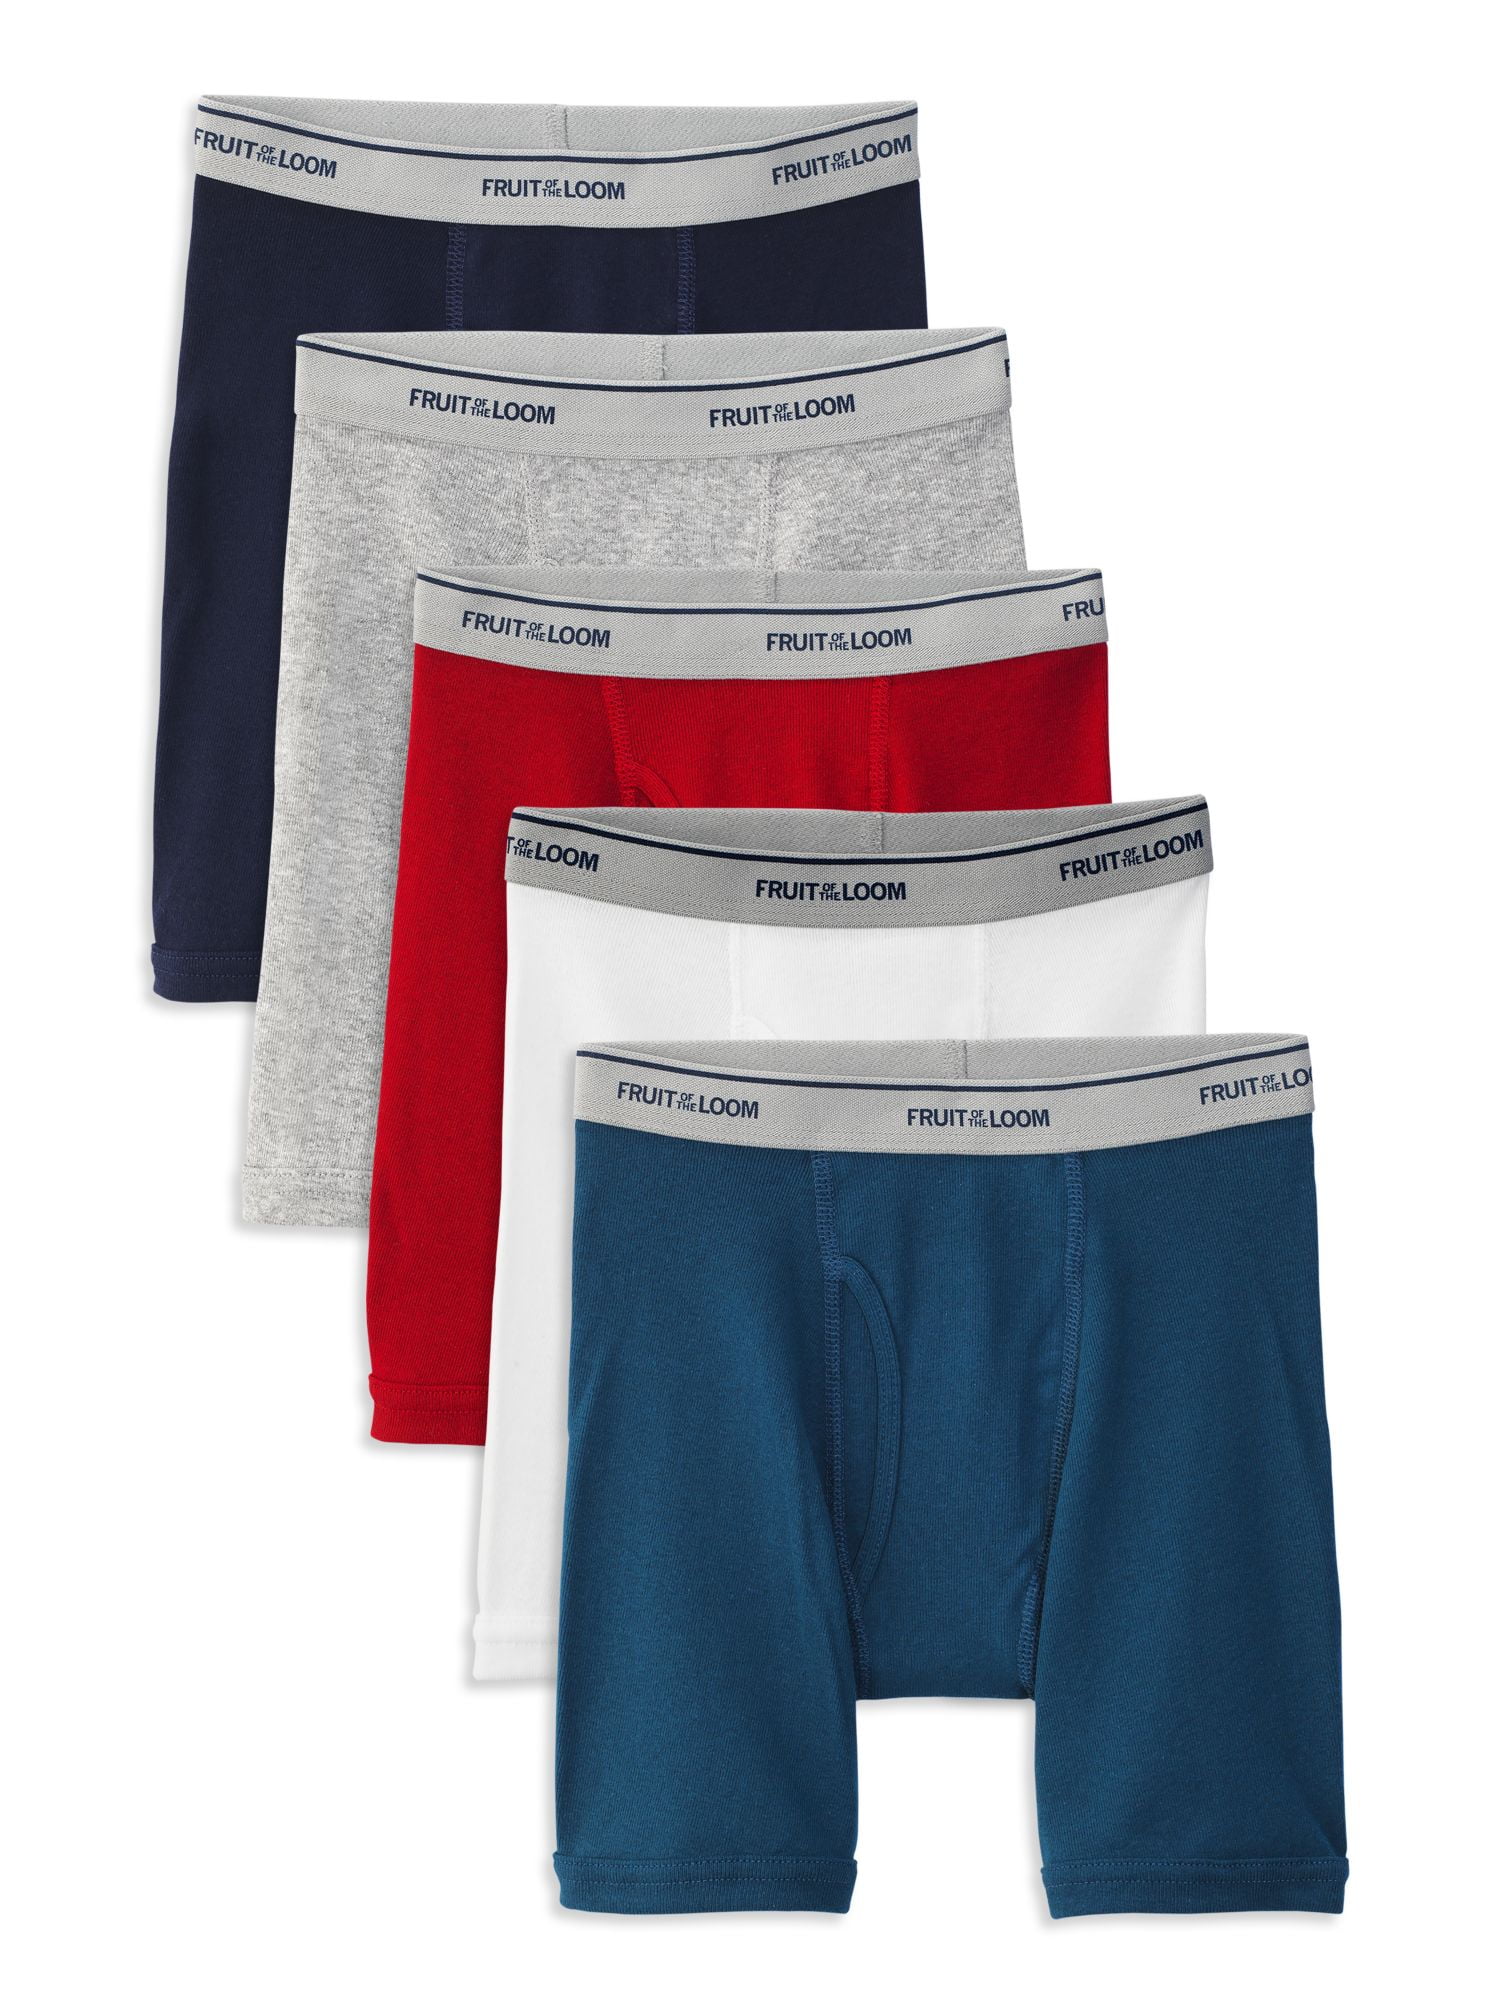 Mens Gap Lot of 3 or 2 Boxers Mixed colors/styles Size XL NWT Gap boxers Pack 3 